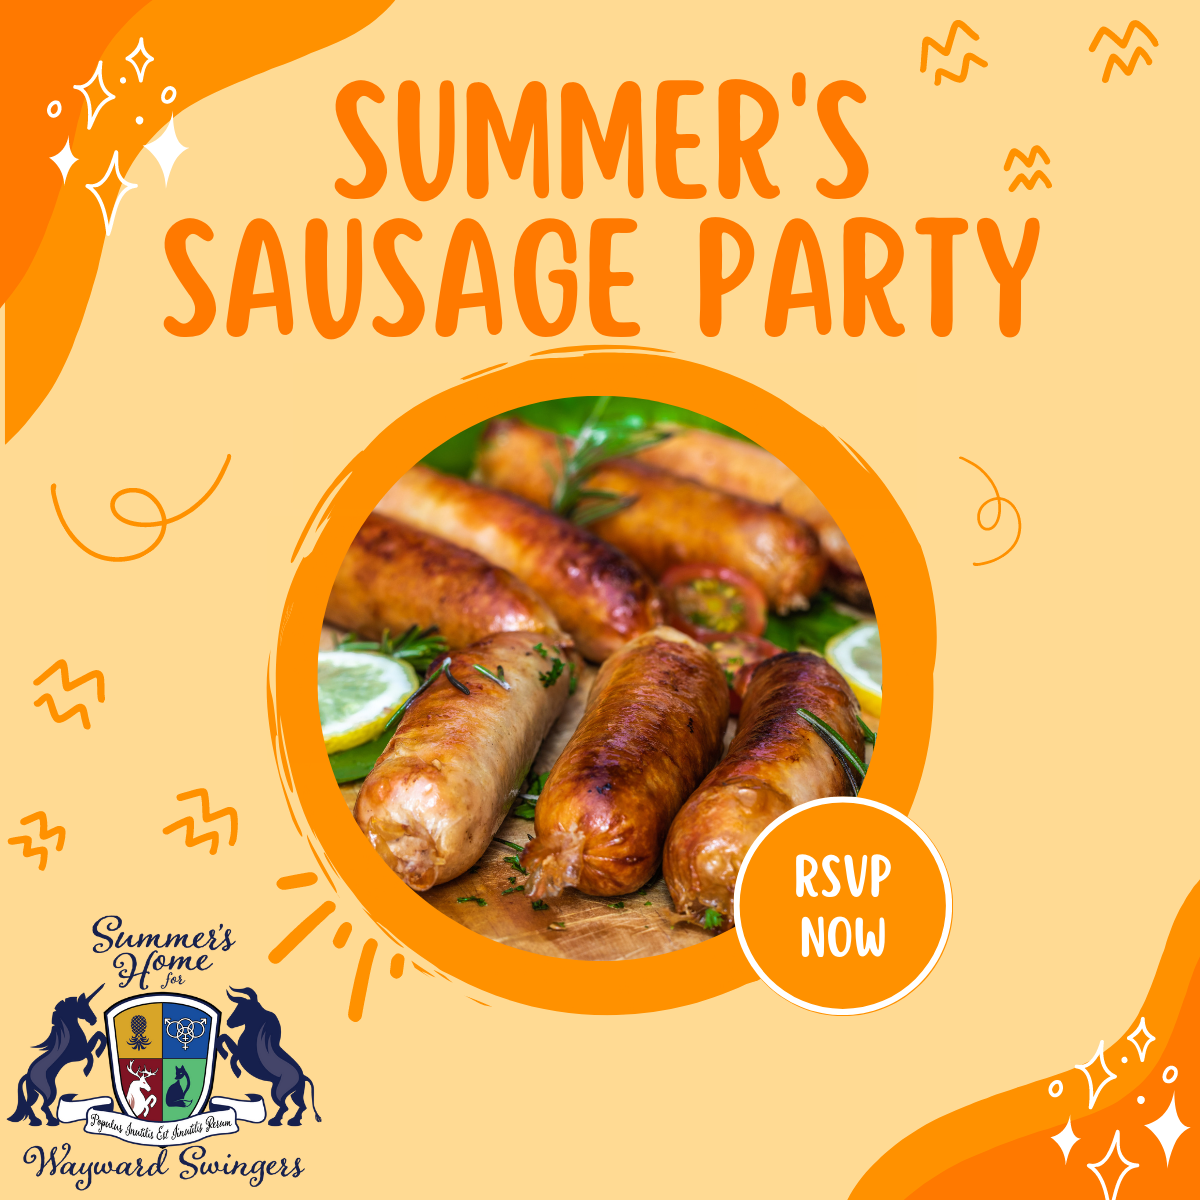 Summer's Sausage Party